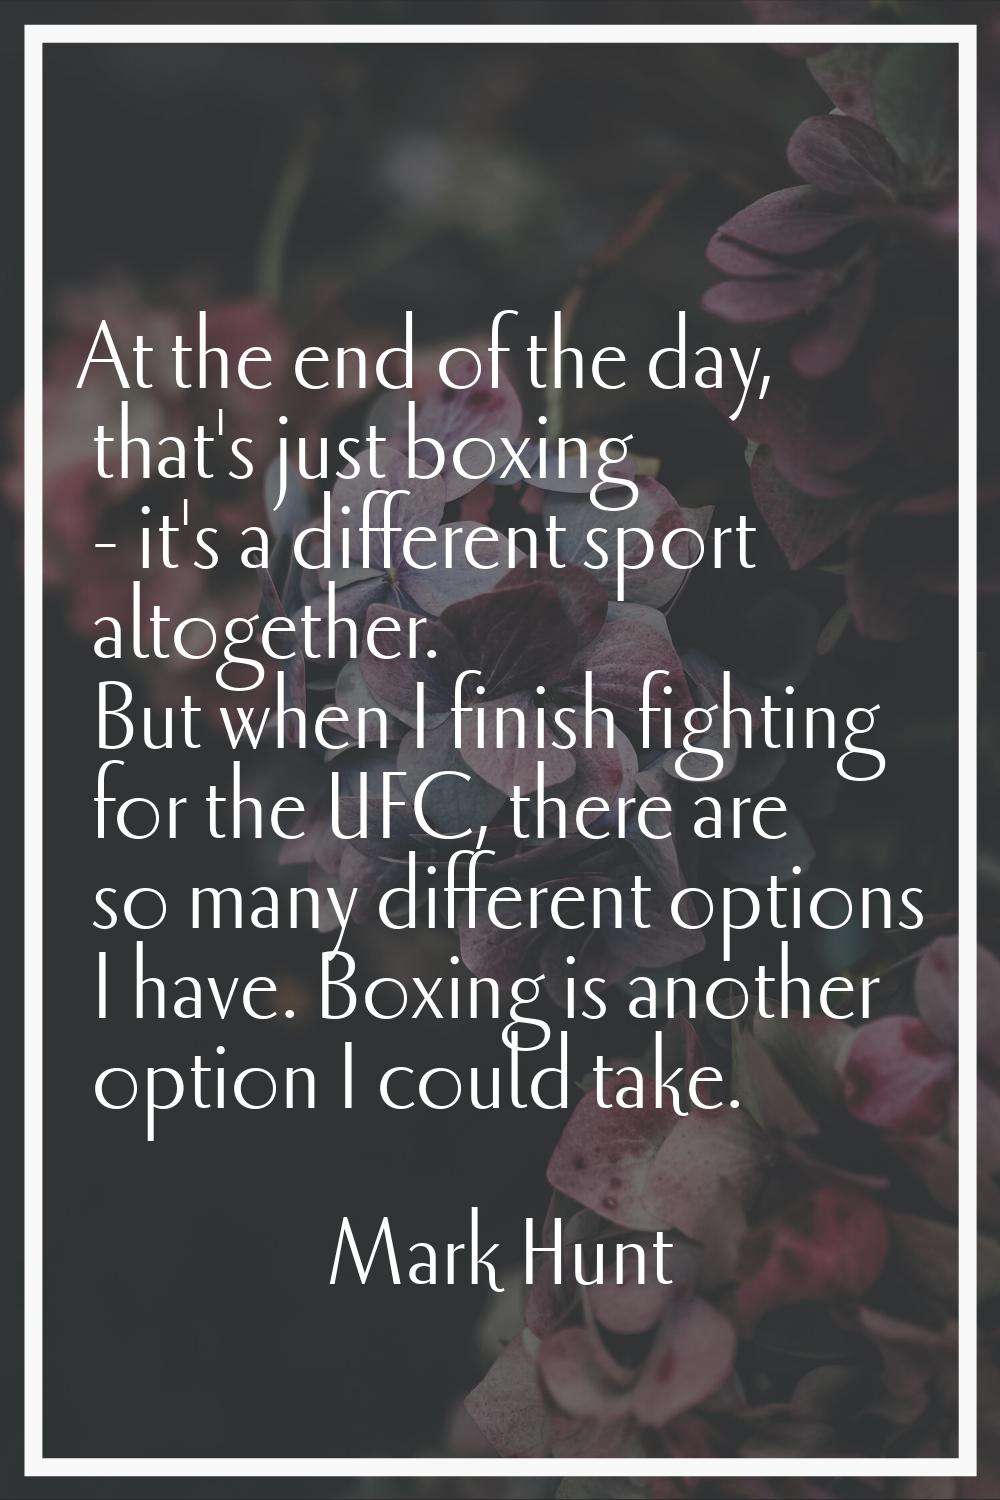 At the end of the day, that's just boxing - it's a different sport altogether. But when I finish fi